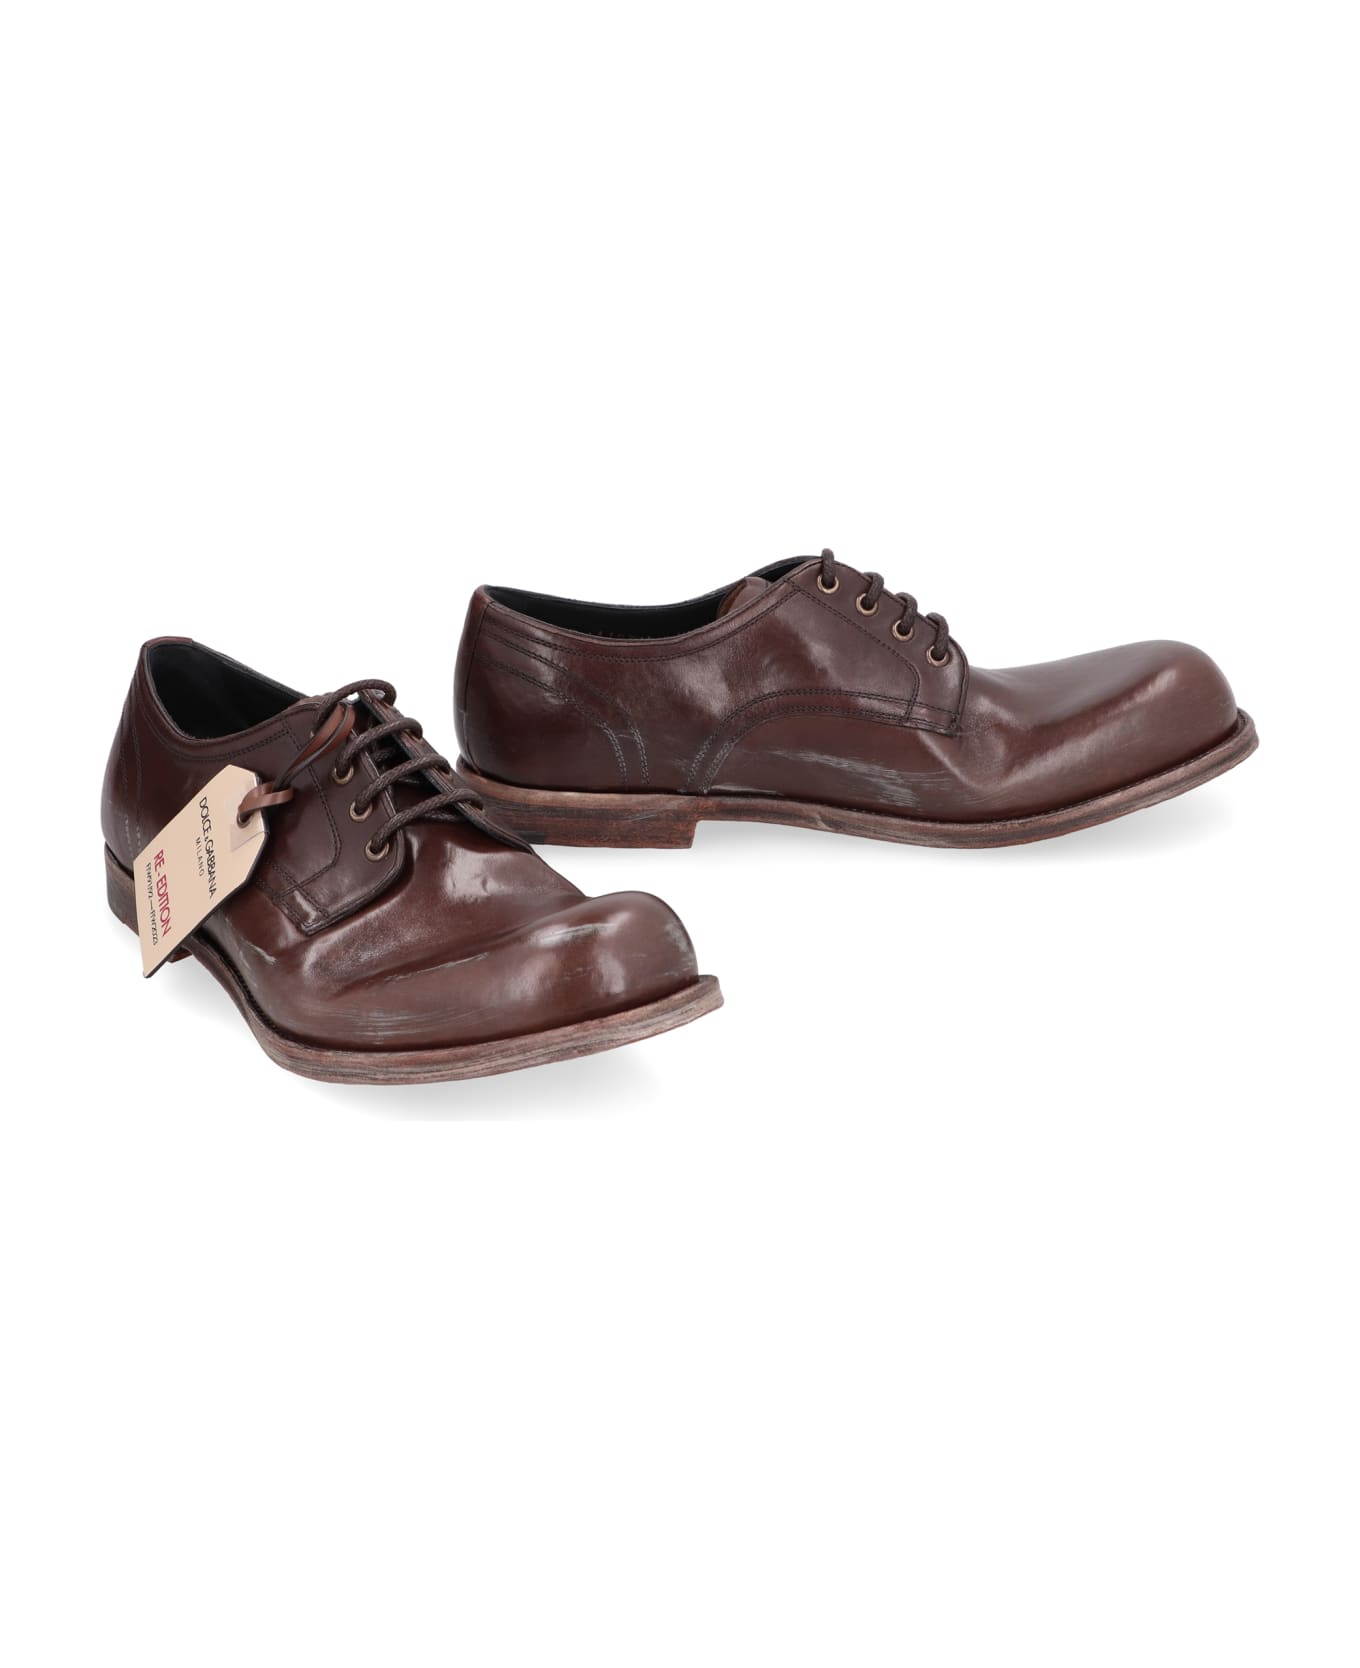 Dolce & Gabbana Leather Lace-up Derby Shoes - Saddle Brown ローファー＆デッキシューズ